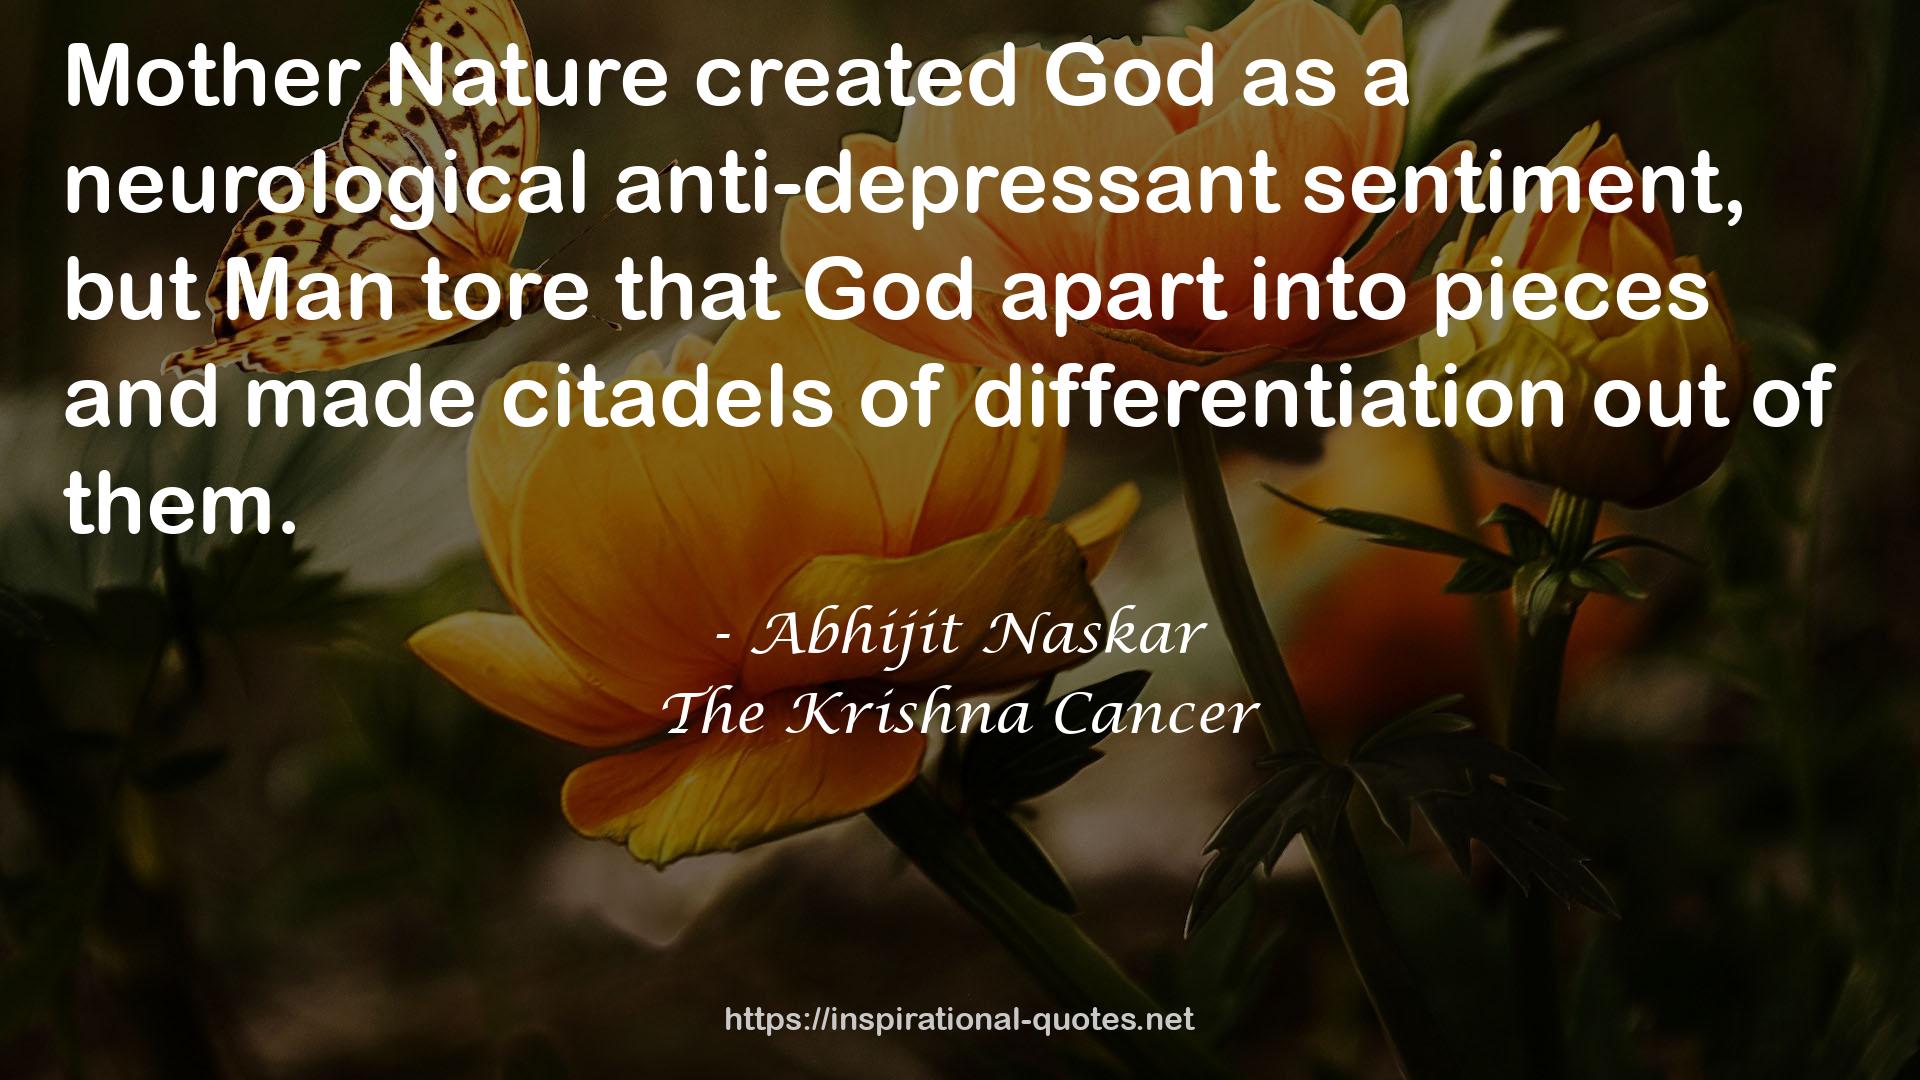 The Krishna Cancer QUOTES